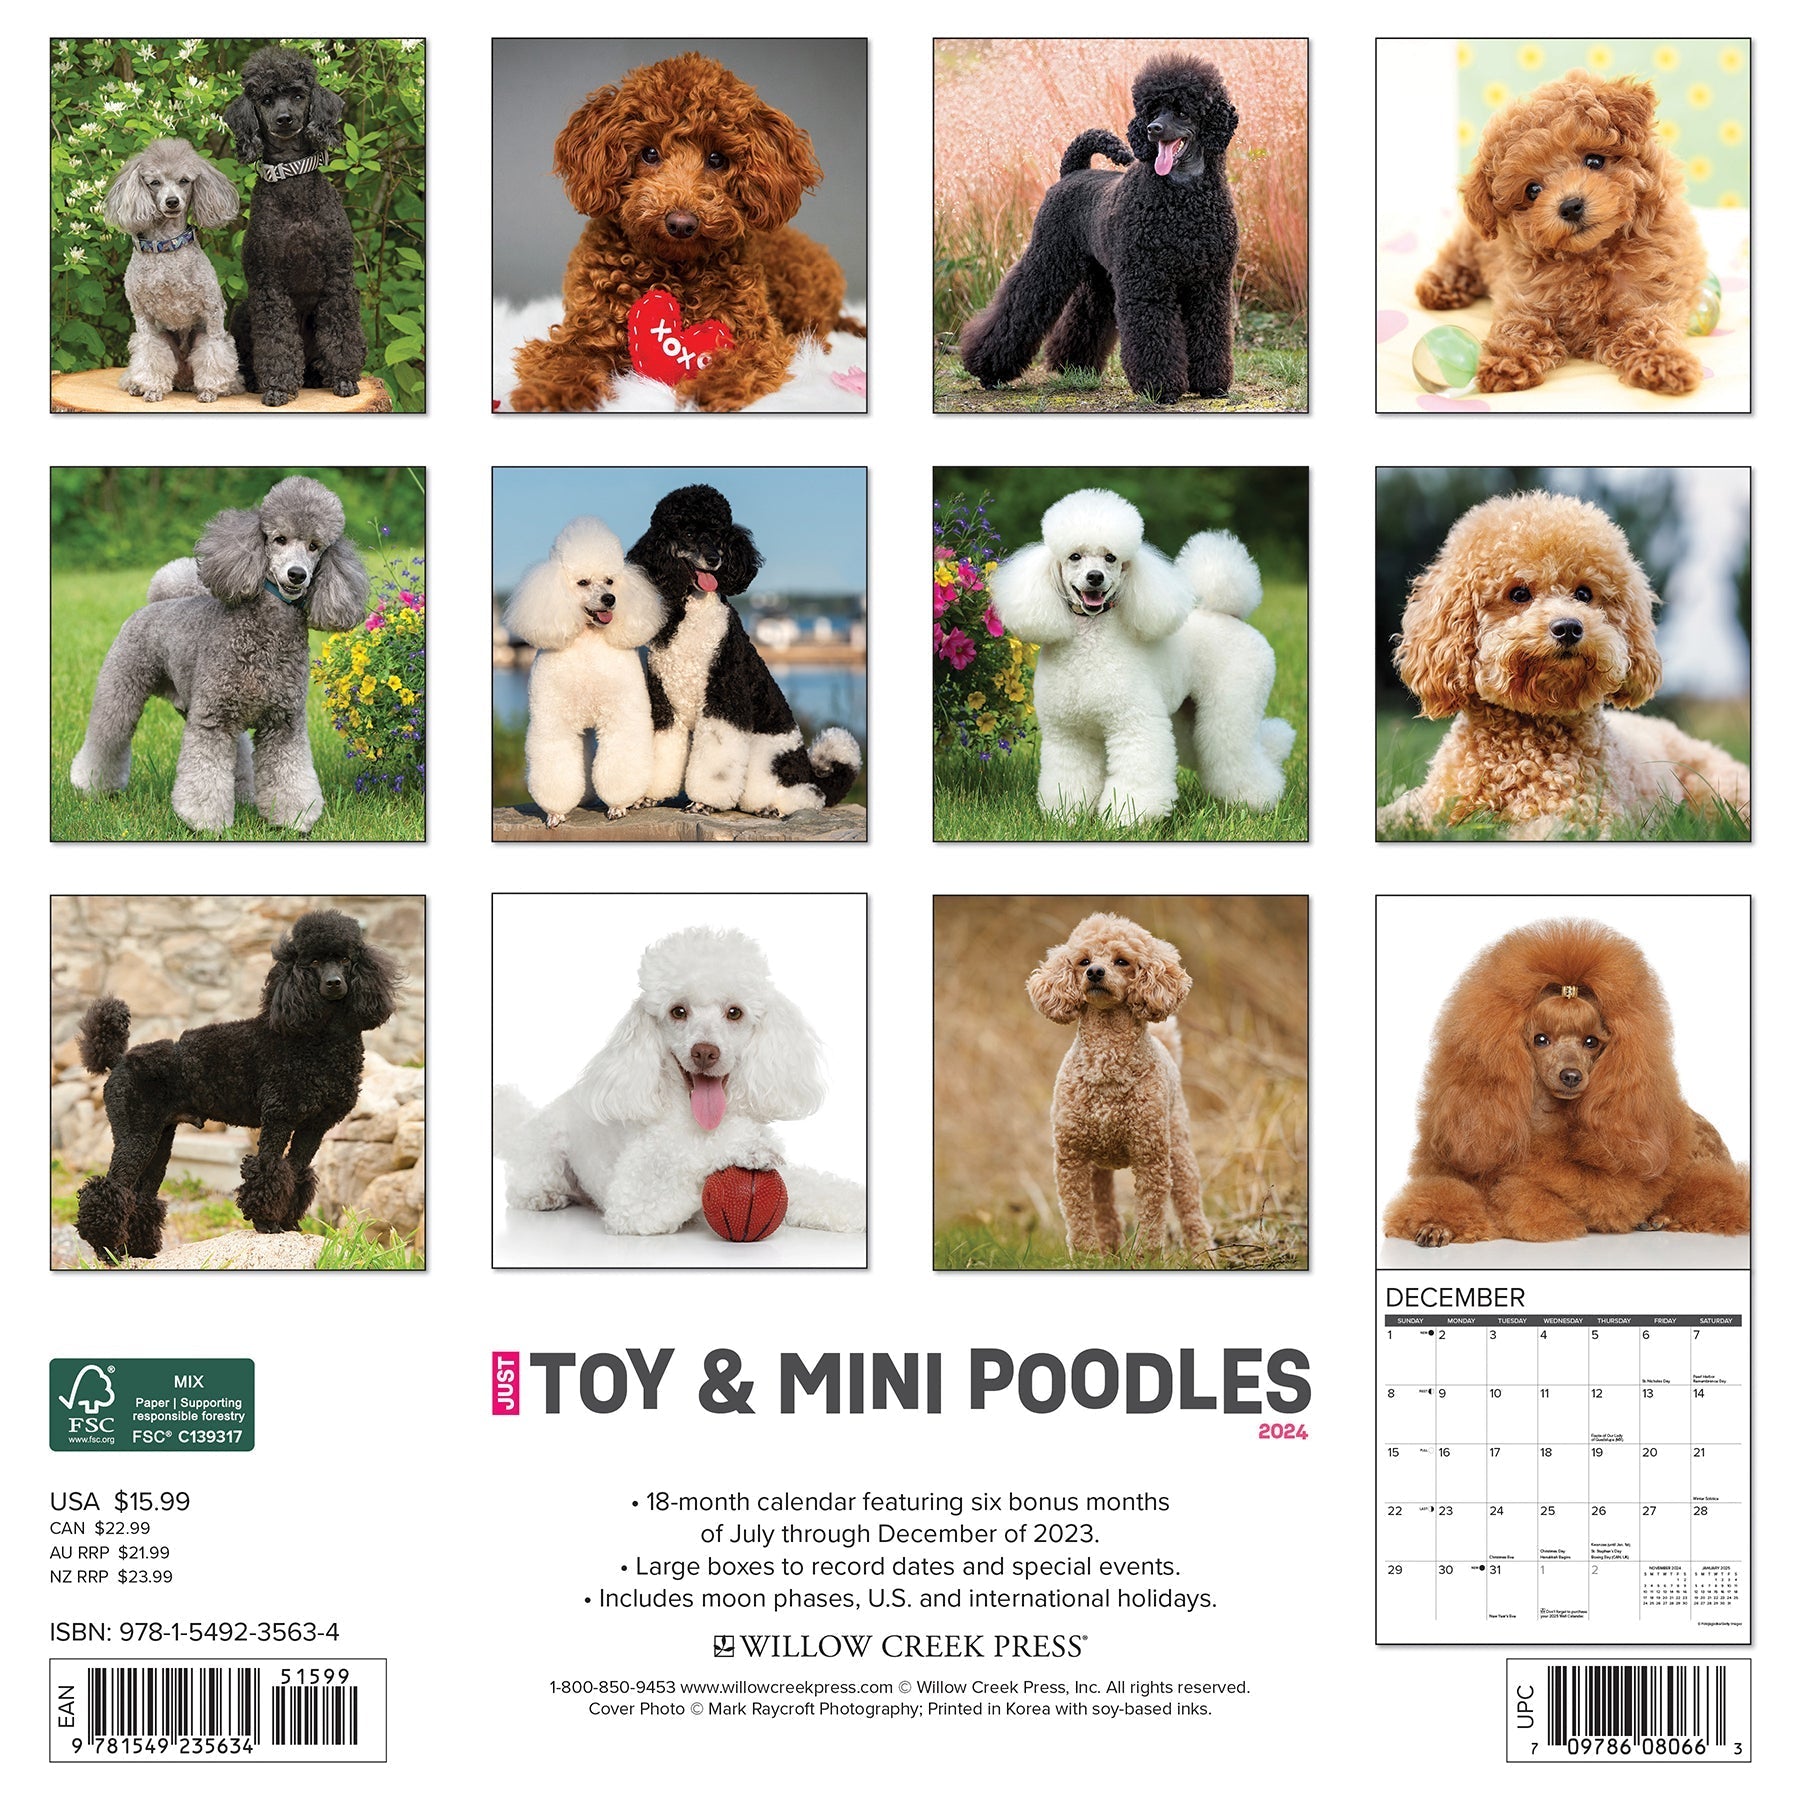 2024 Just Toy & Miniature Poodles - Square Wall Calendar US